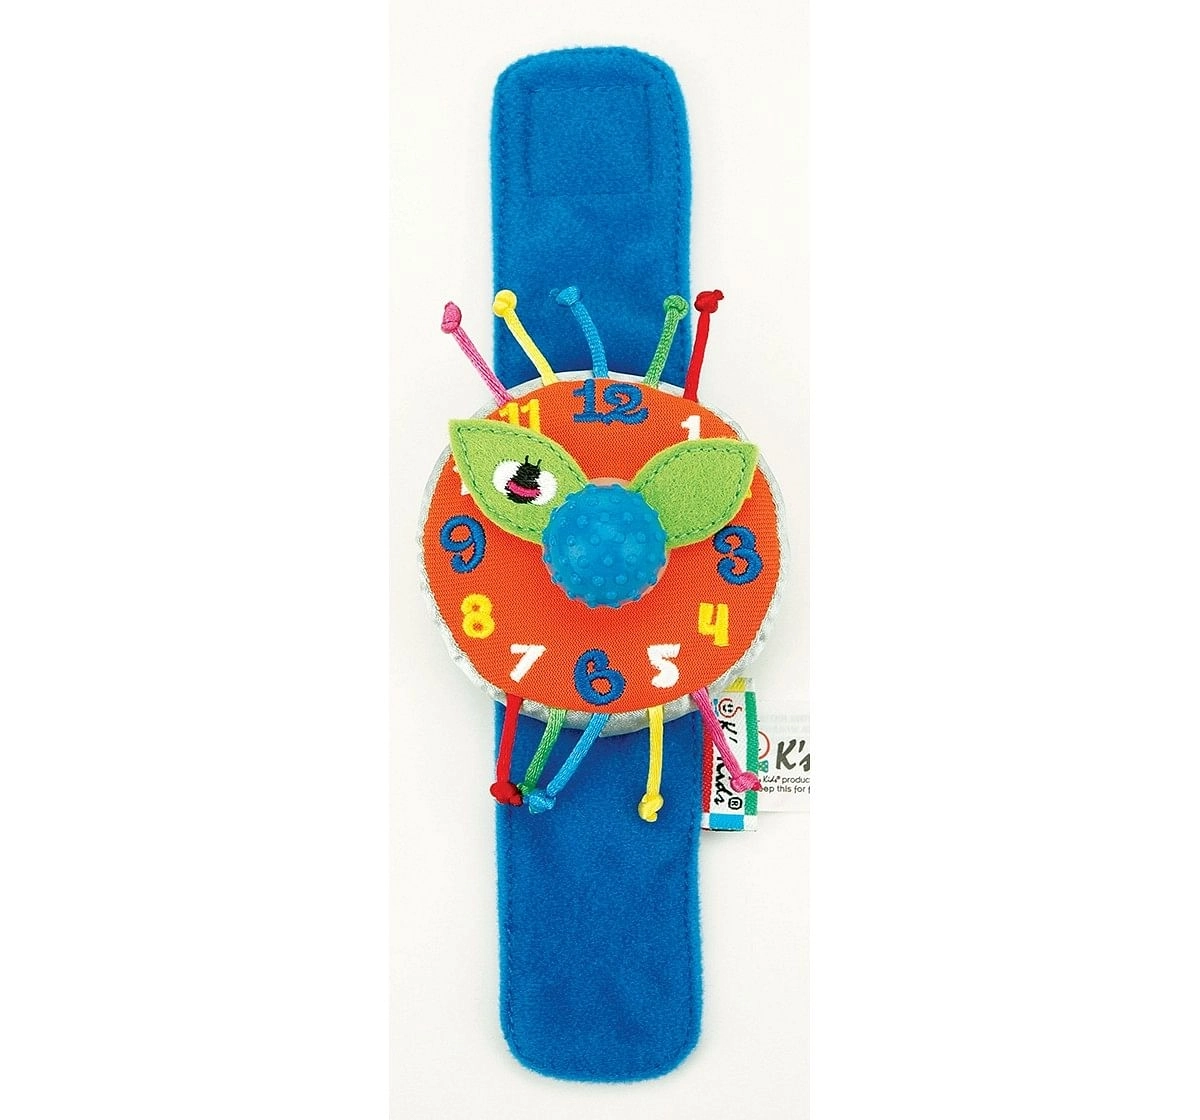 K'S Kids Baby'S First Watch Early Learner Toys for Kids age 9M+ 